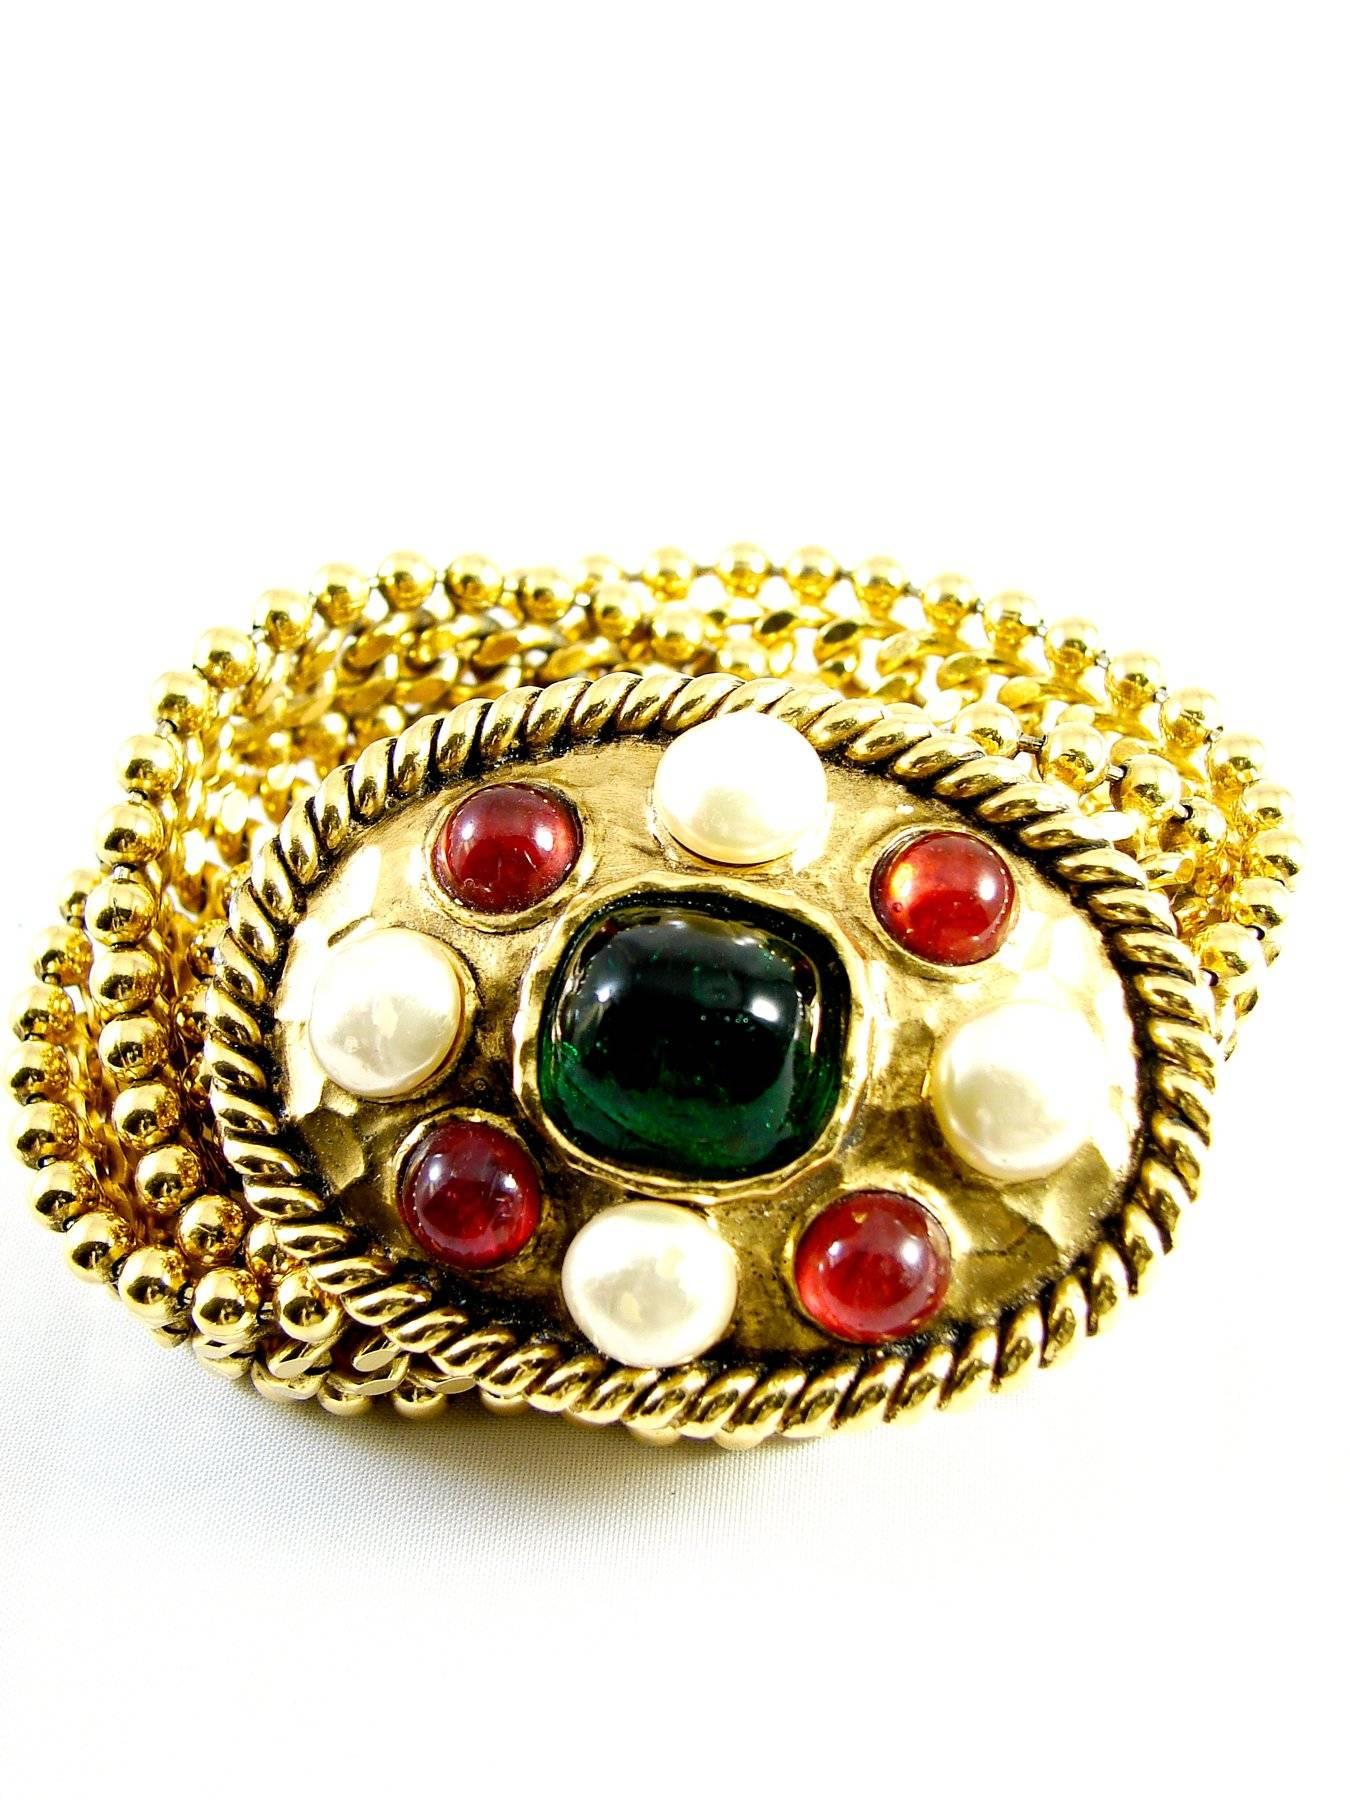 Women's 70s Chanel Byzantine Chain Belt with Faux Pearl Red Green Poured Glass Buckle M